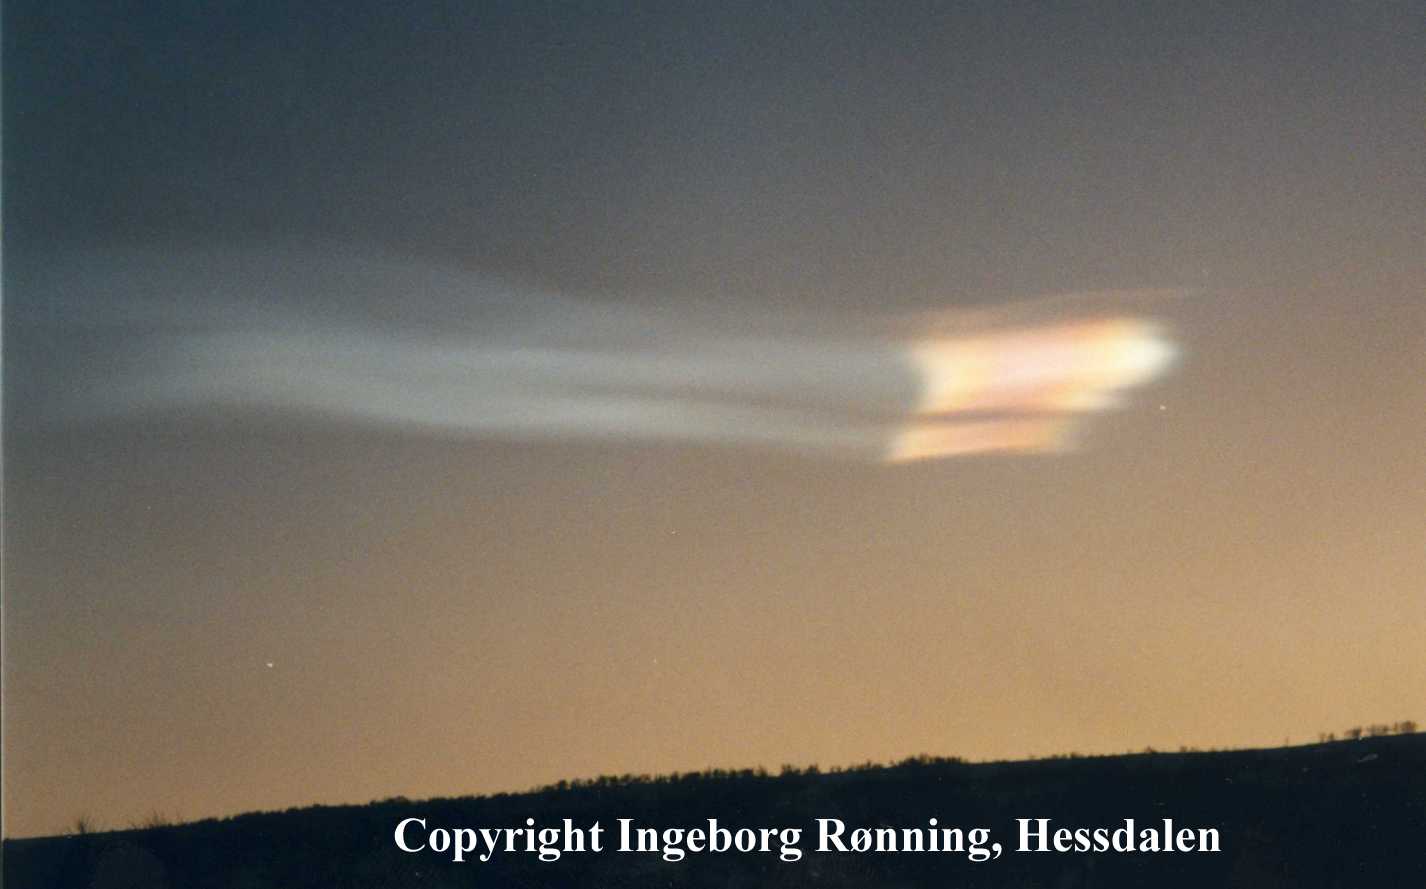 Picture no.5 of a cloud in Hessdalen (big verson)